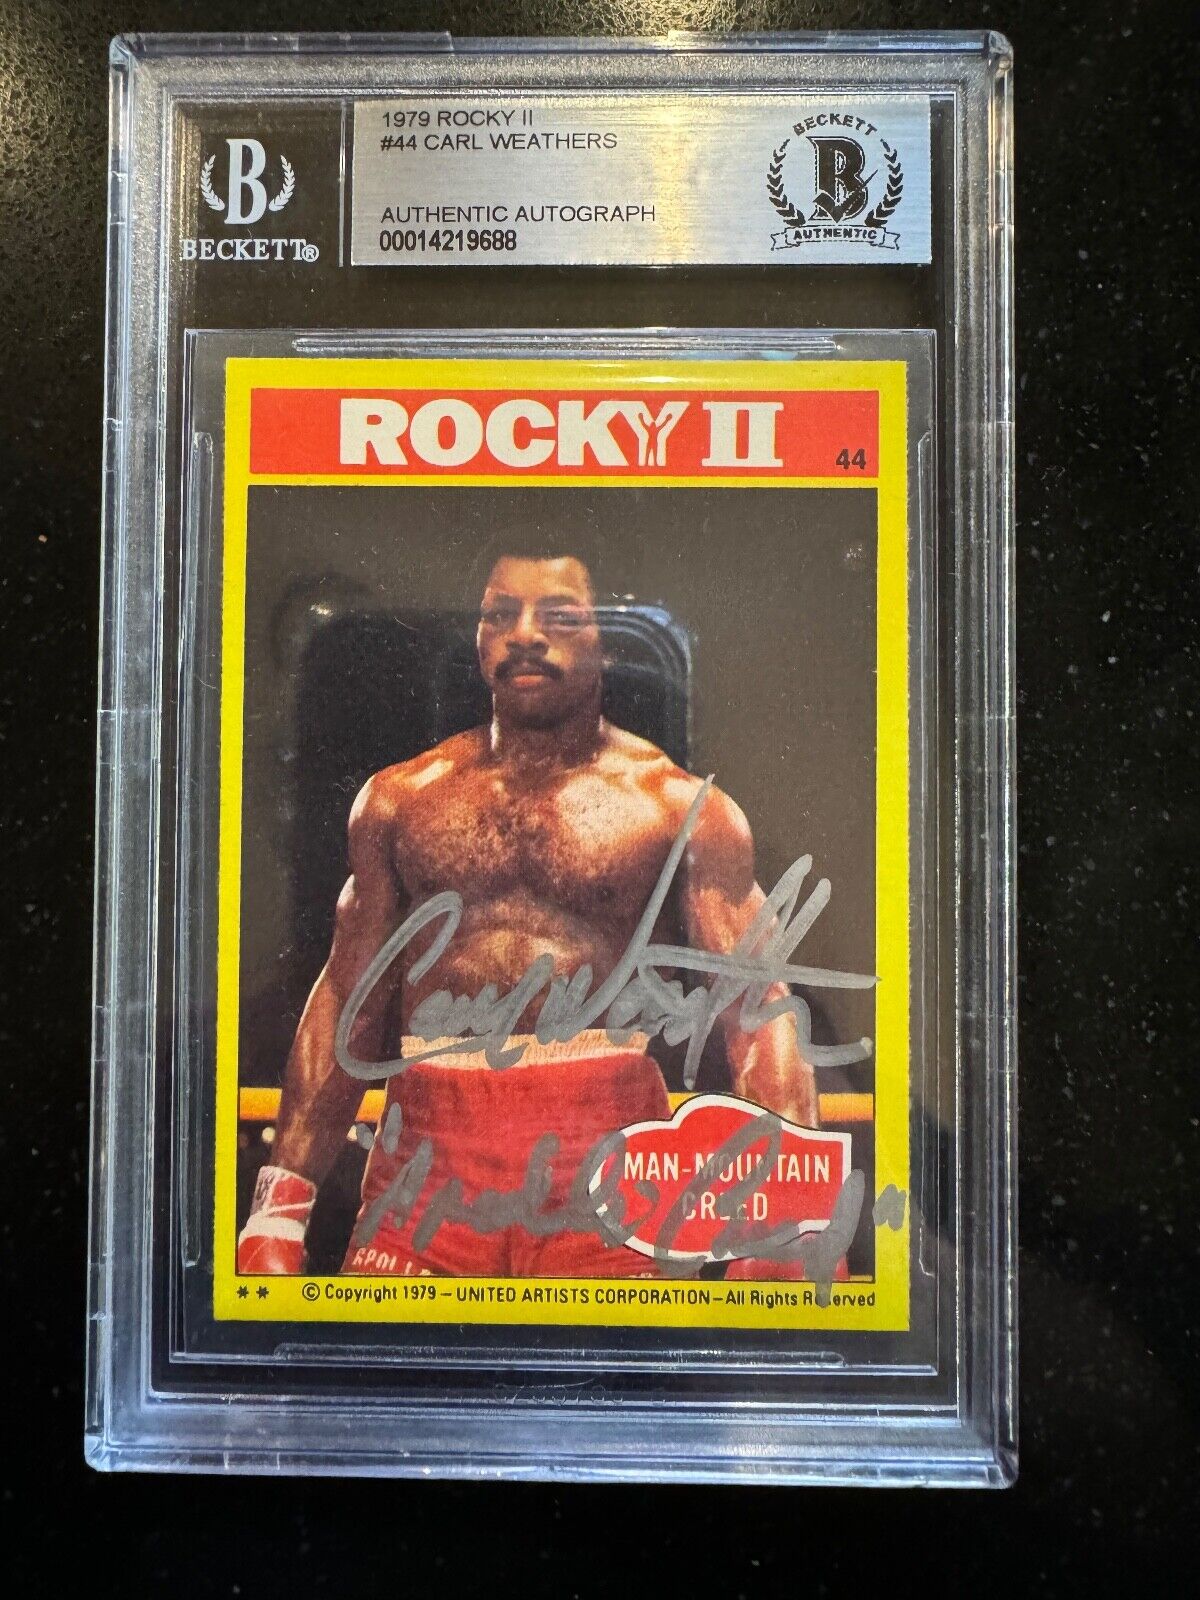 Carl Weathers Autographed 1979 Topps ROCKY Set Rookie Card BSA Auto Inscribed